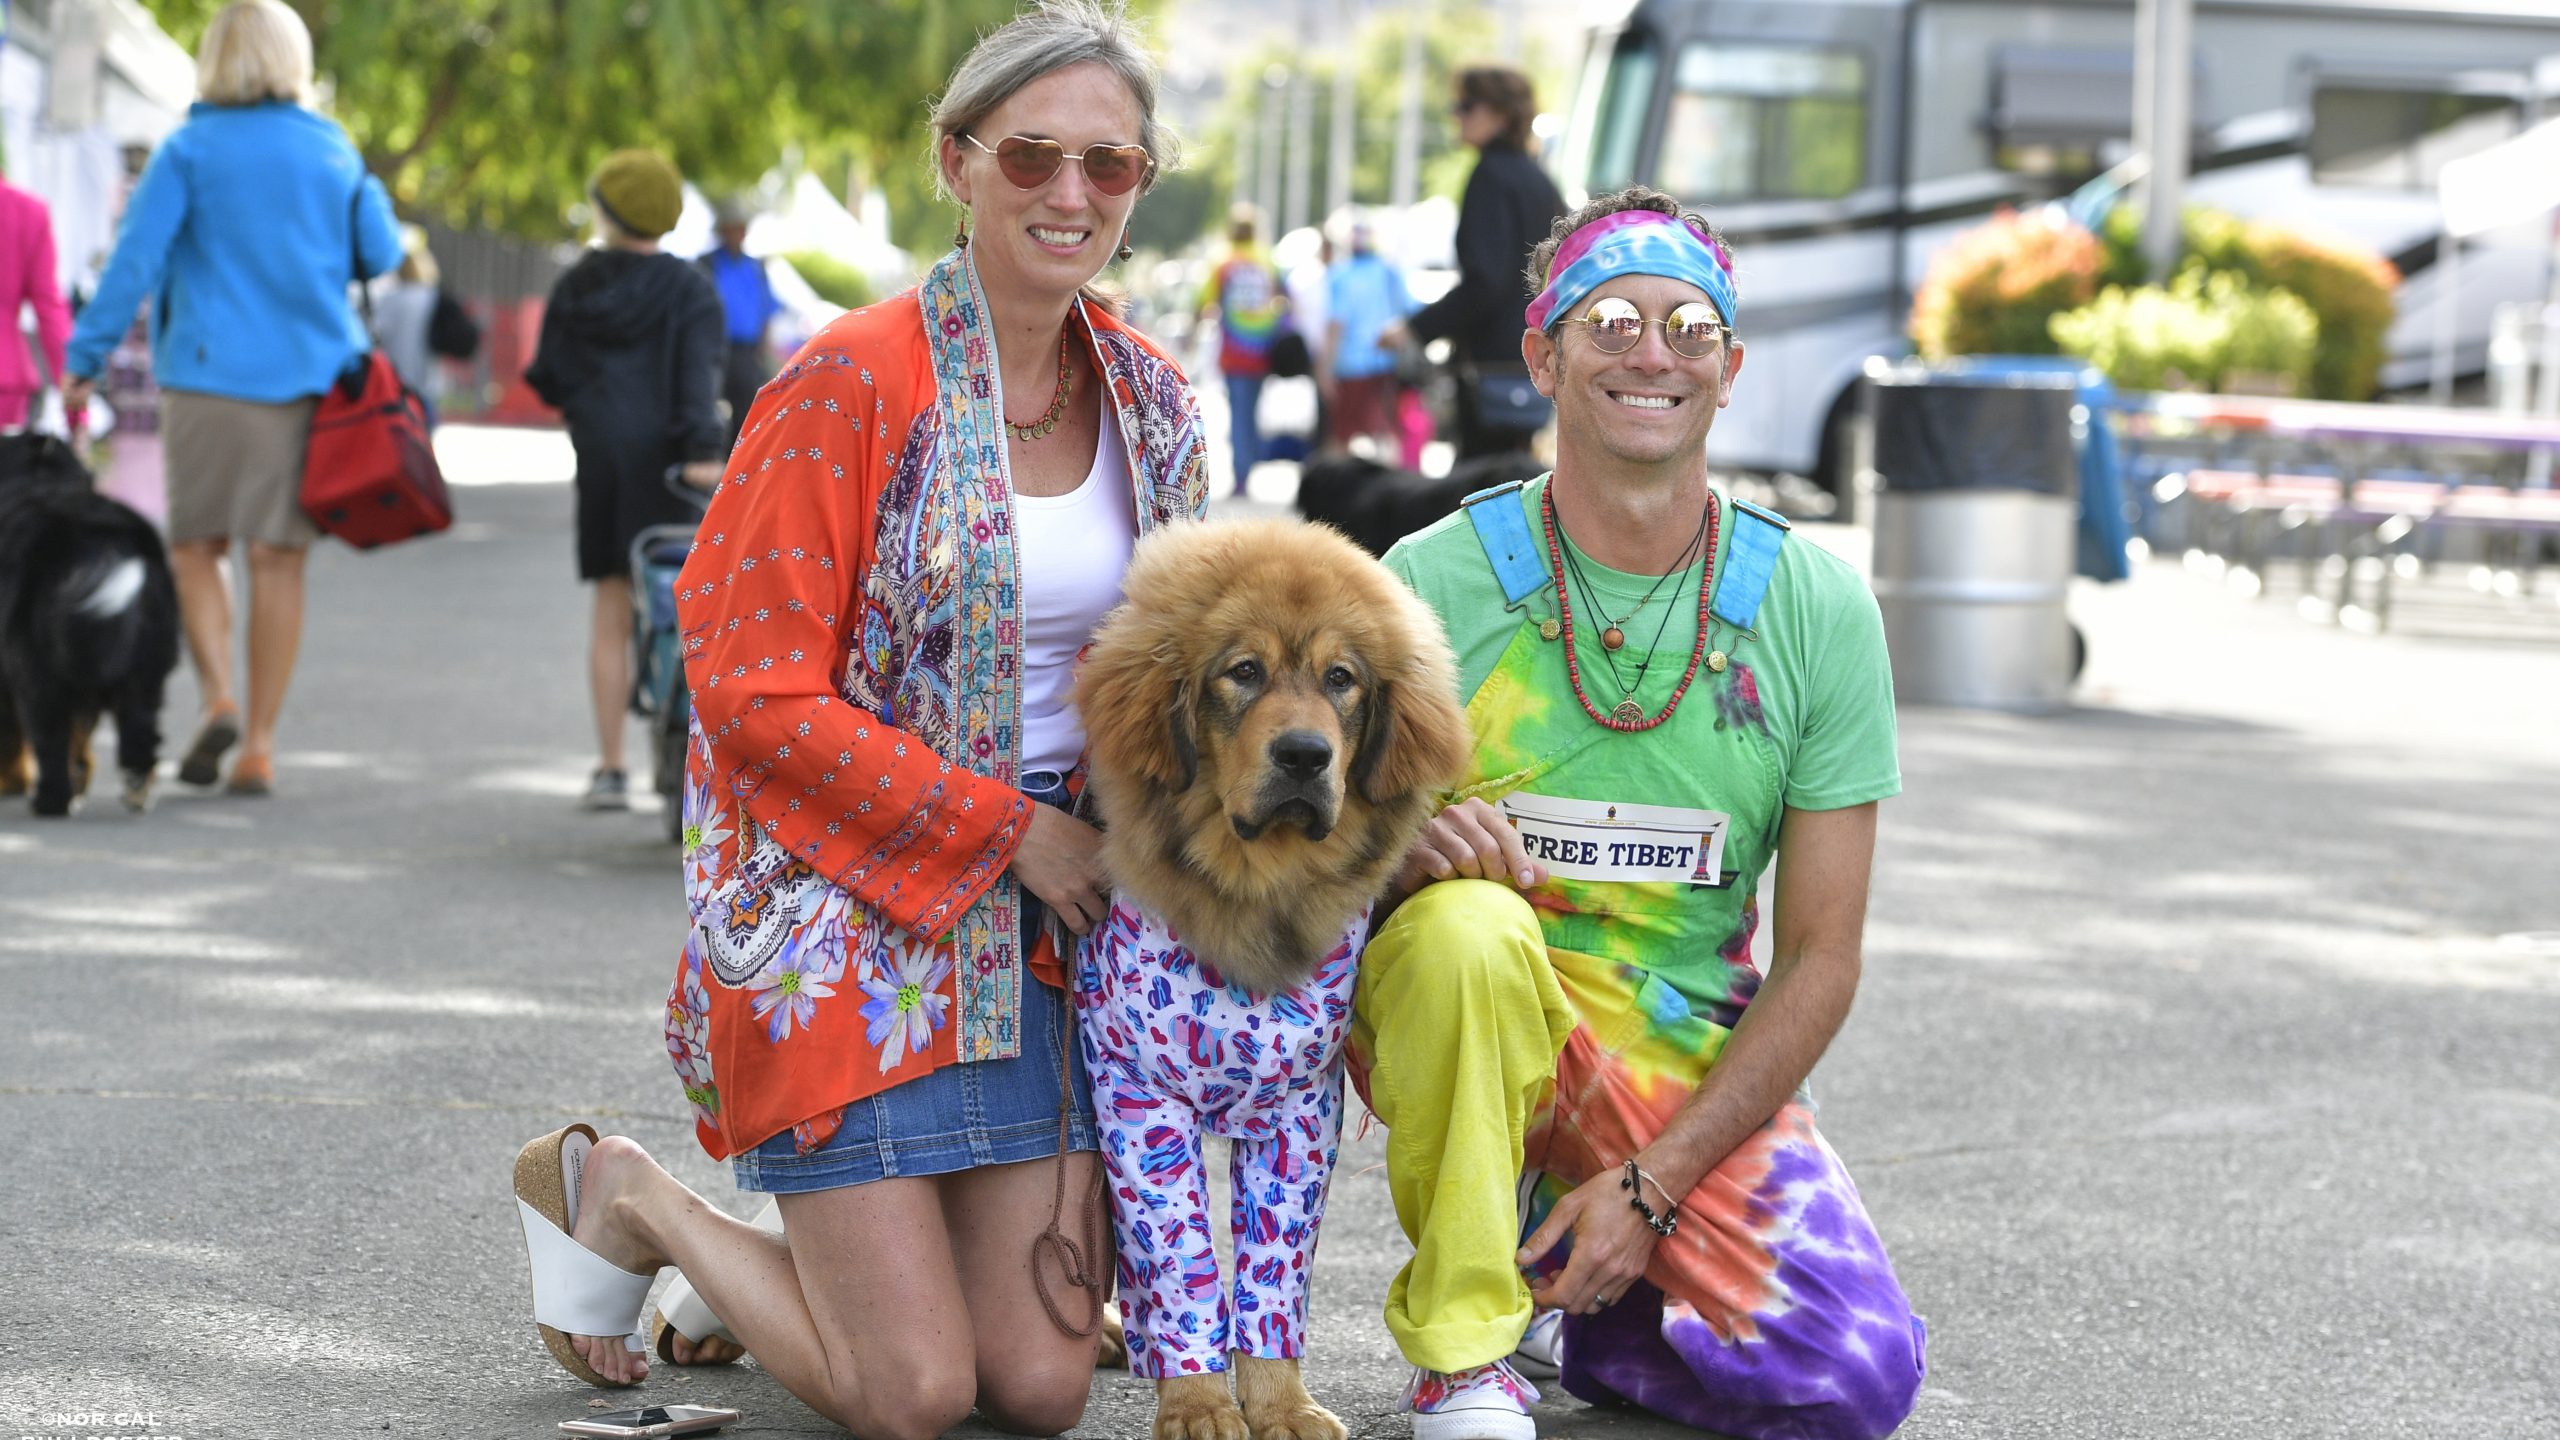 A man and a woman, both dressed in brightly colored bohemian clothing, kneel beside their large, fluffy dog. The dog is also wearing a vibrant outfit. They are outdoors at Woofstock, surrounded by people and tents. The man holds a sign that reads "Free Tibet.